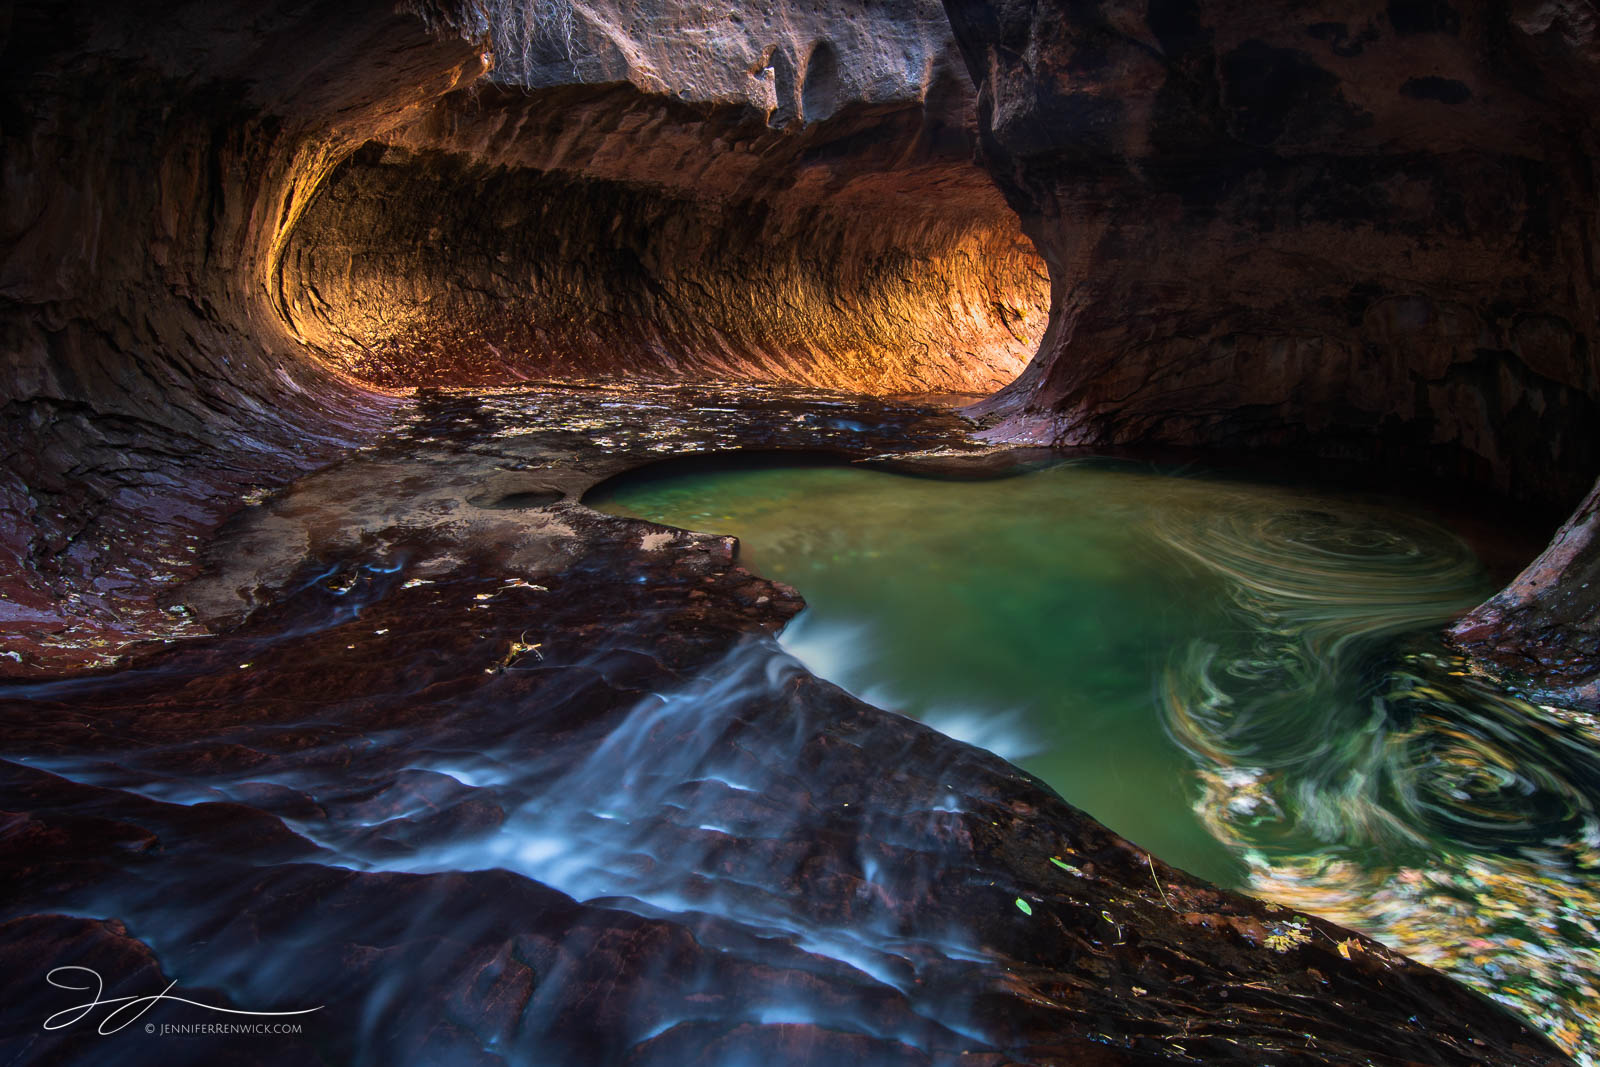 Leaves swirl in circles in a small pool while the walls glow with reflected light in the Subway in Zion National Park.